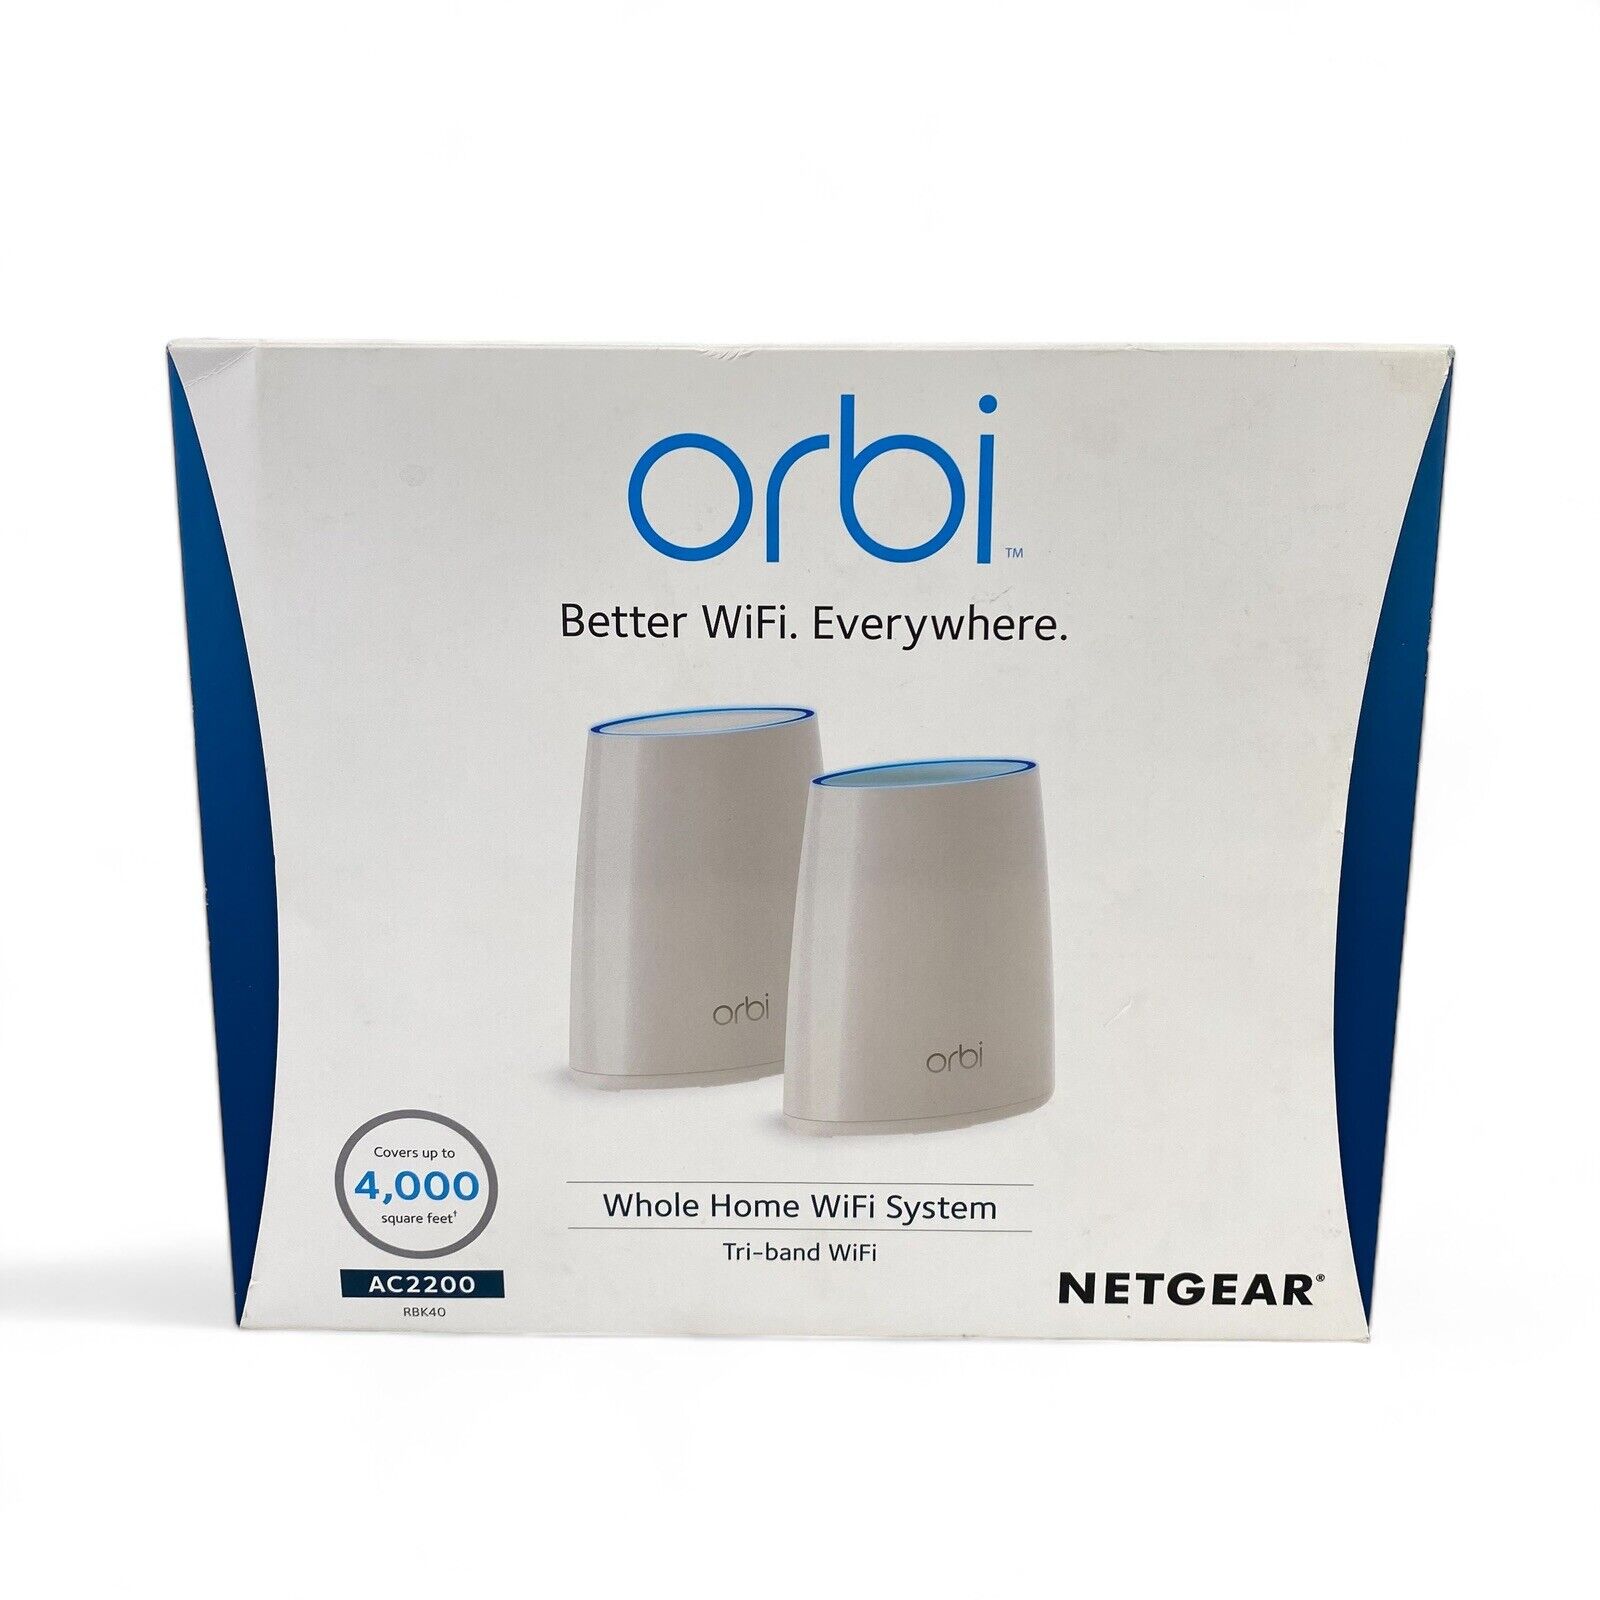 Netgear Orbi RBK40 AC2200 Whole Home Tri-Band WiFi System Used In Box